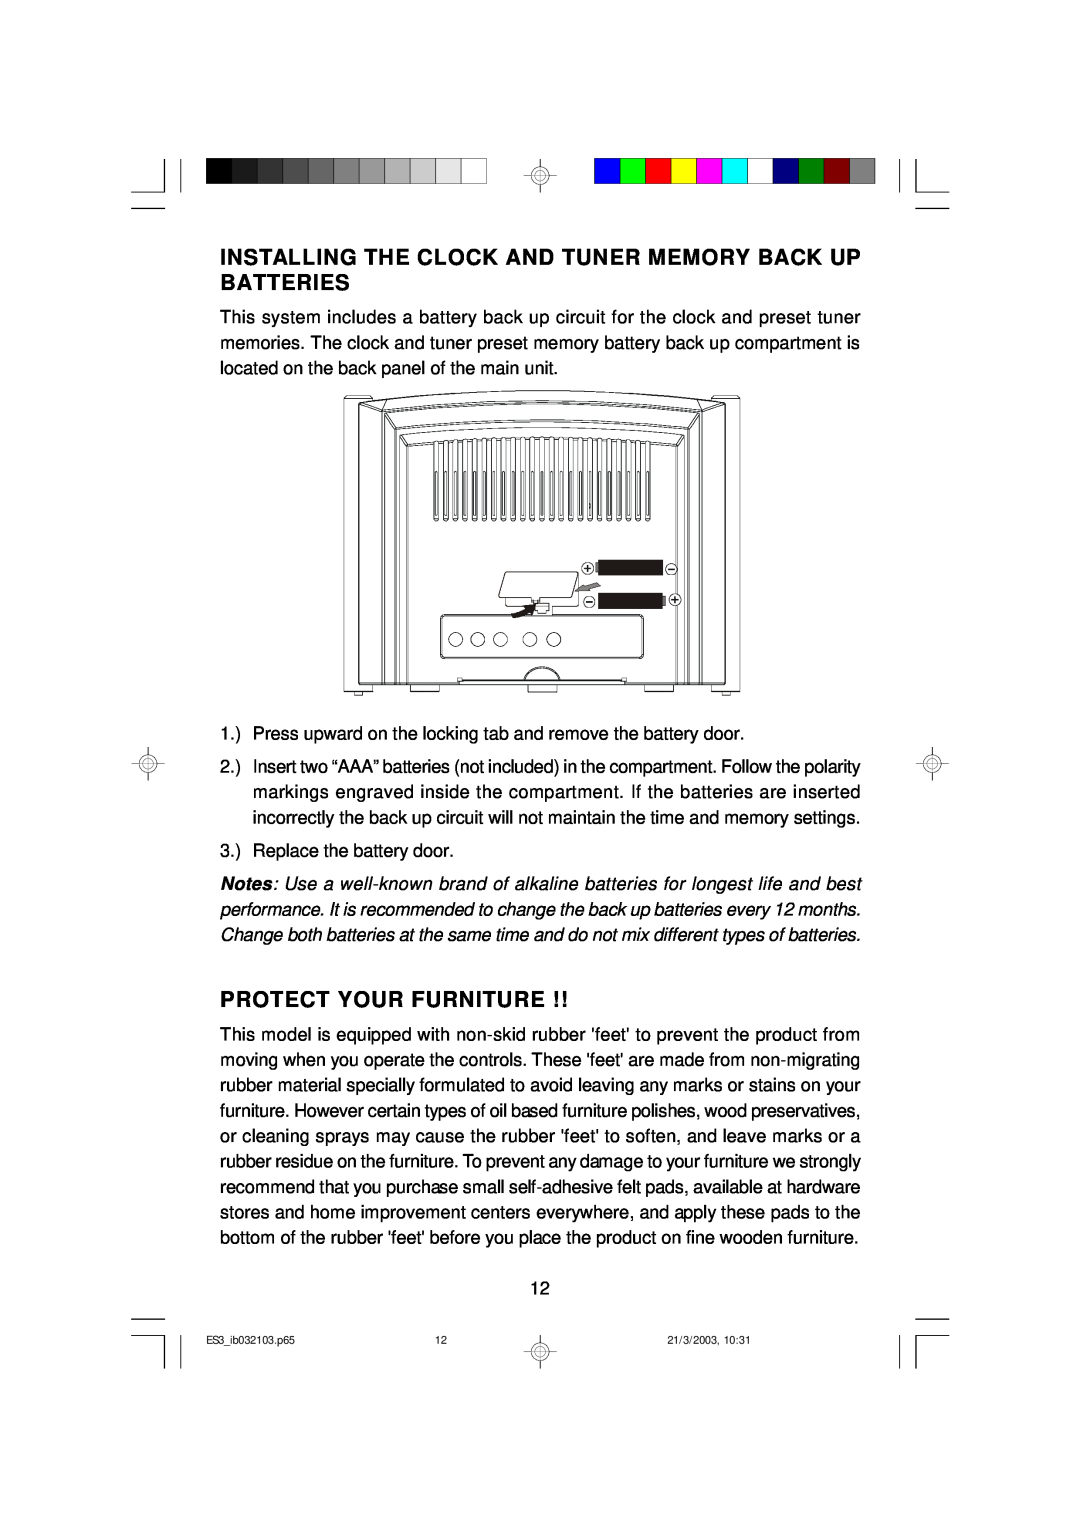 Emerson ES3 owner manual Protect Your Furniture, Replace the battery door 